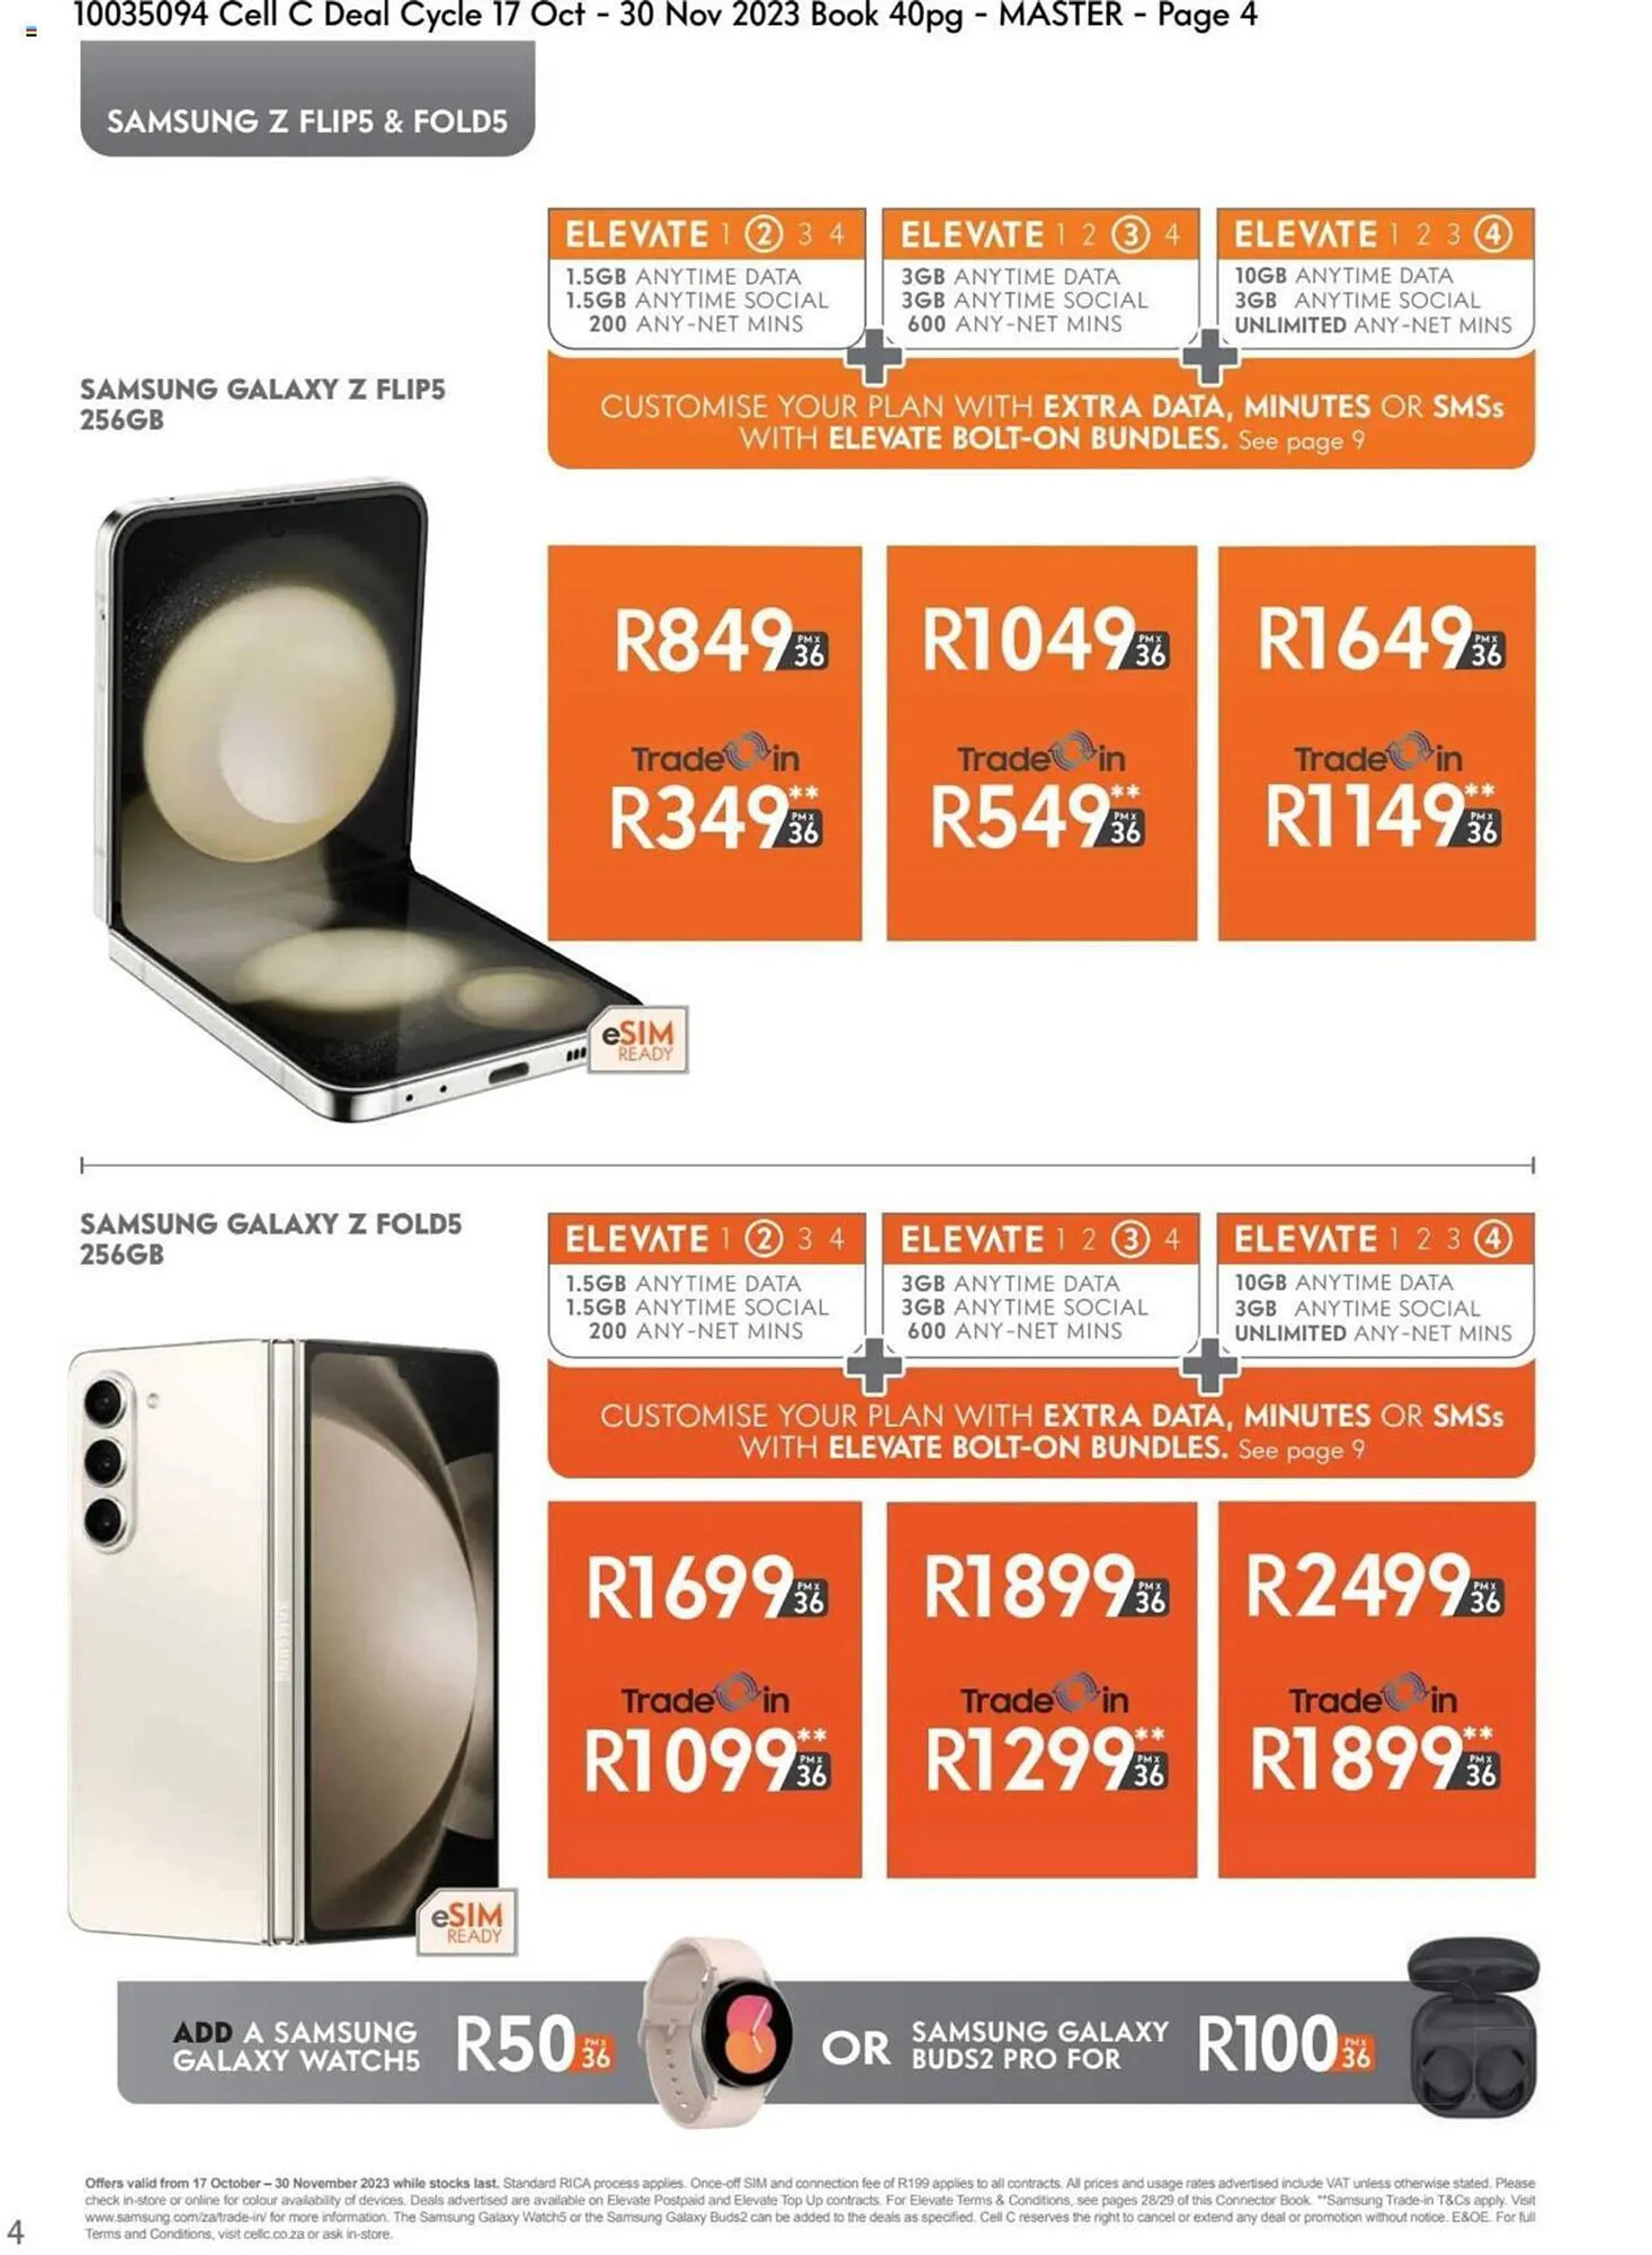 Cell C catalogue - 4